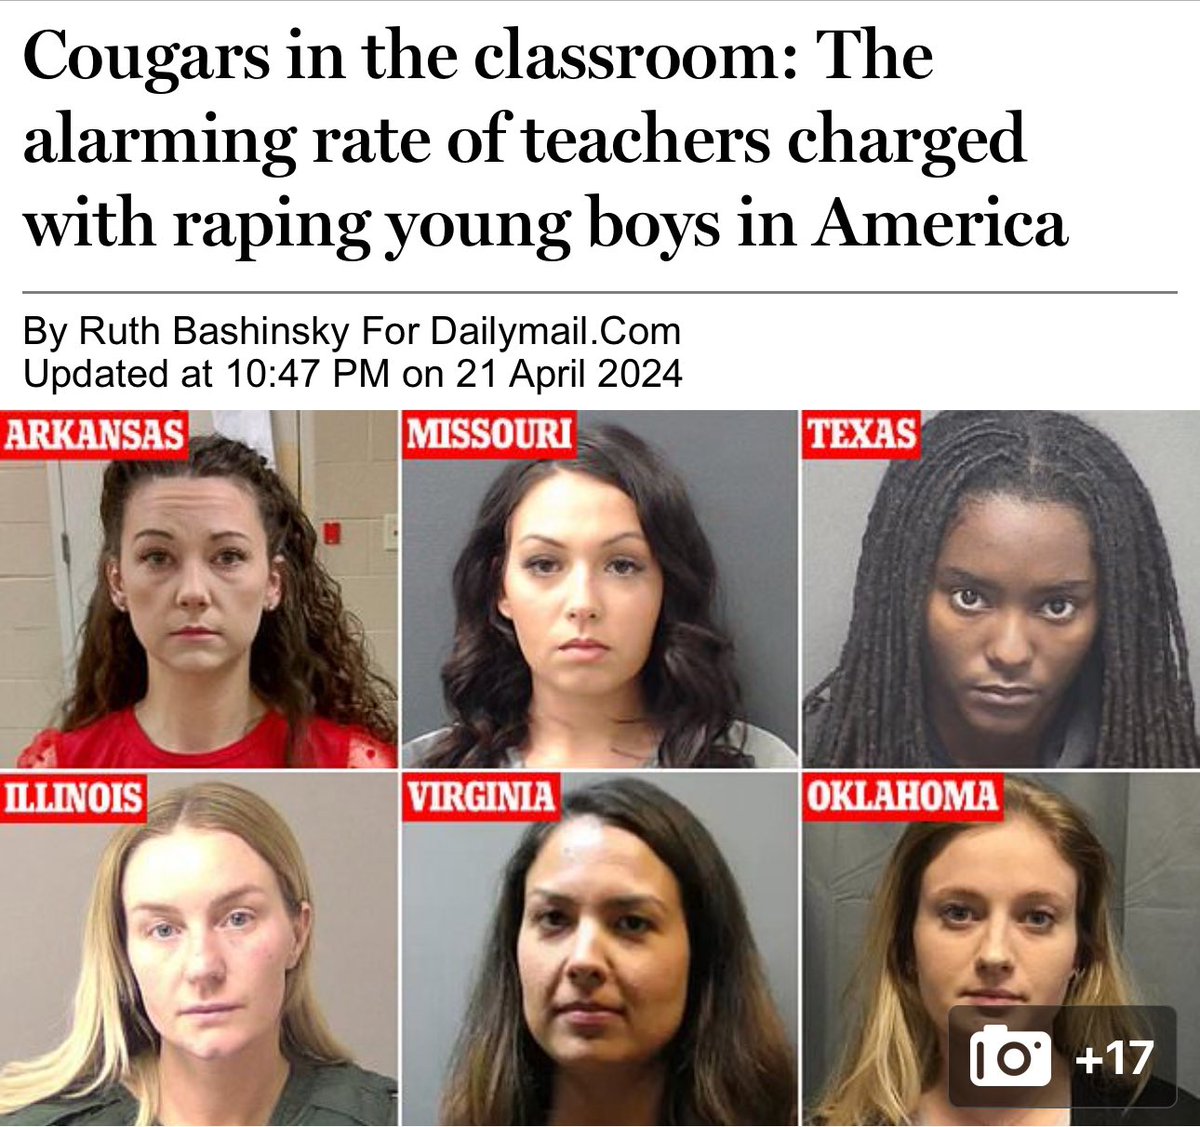 Alarming rate of teachers charged with raping young boys in America mol.im/a/13326161